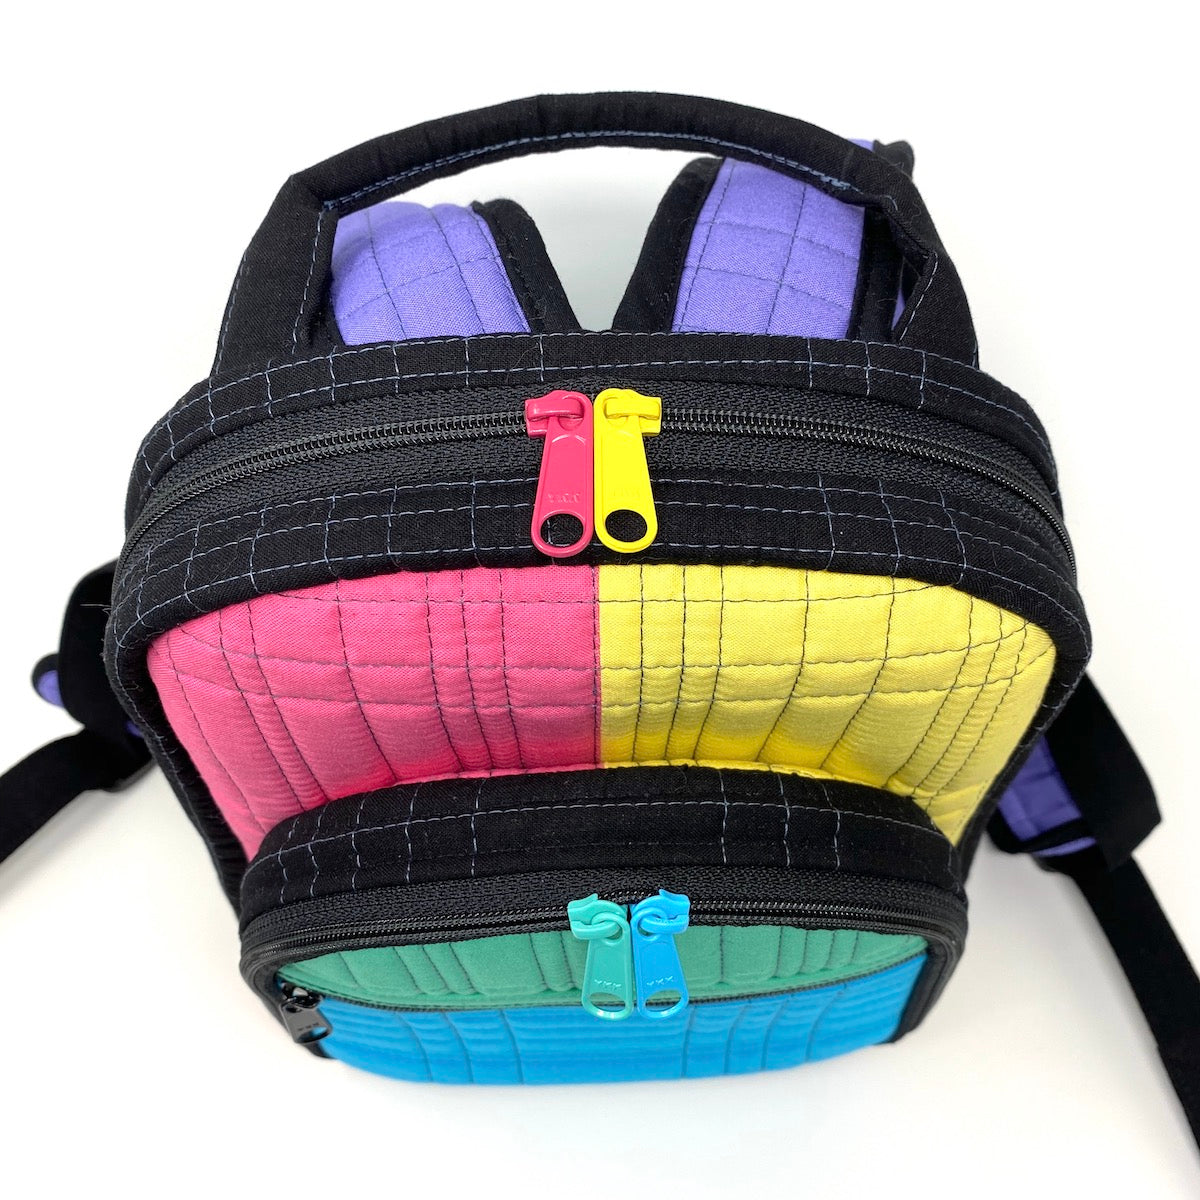 ByAnnie Out and About colorblock backpack at Sewfinity.com